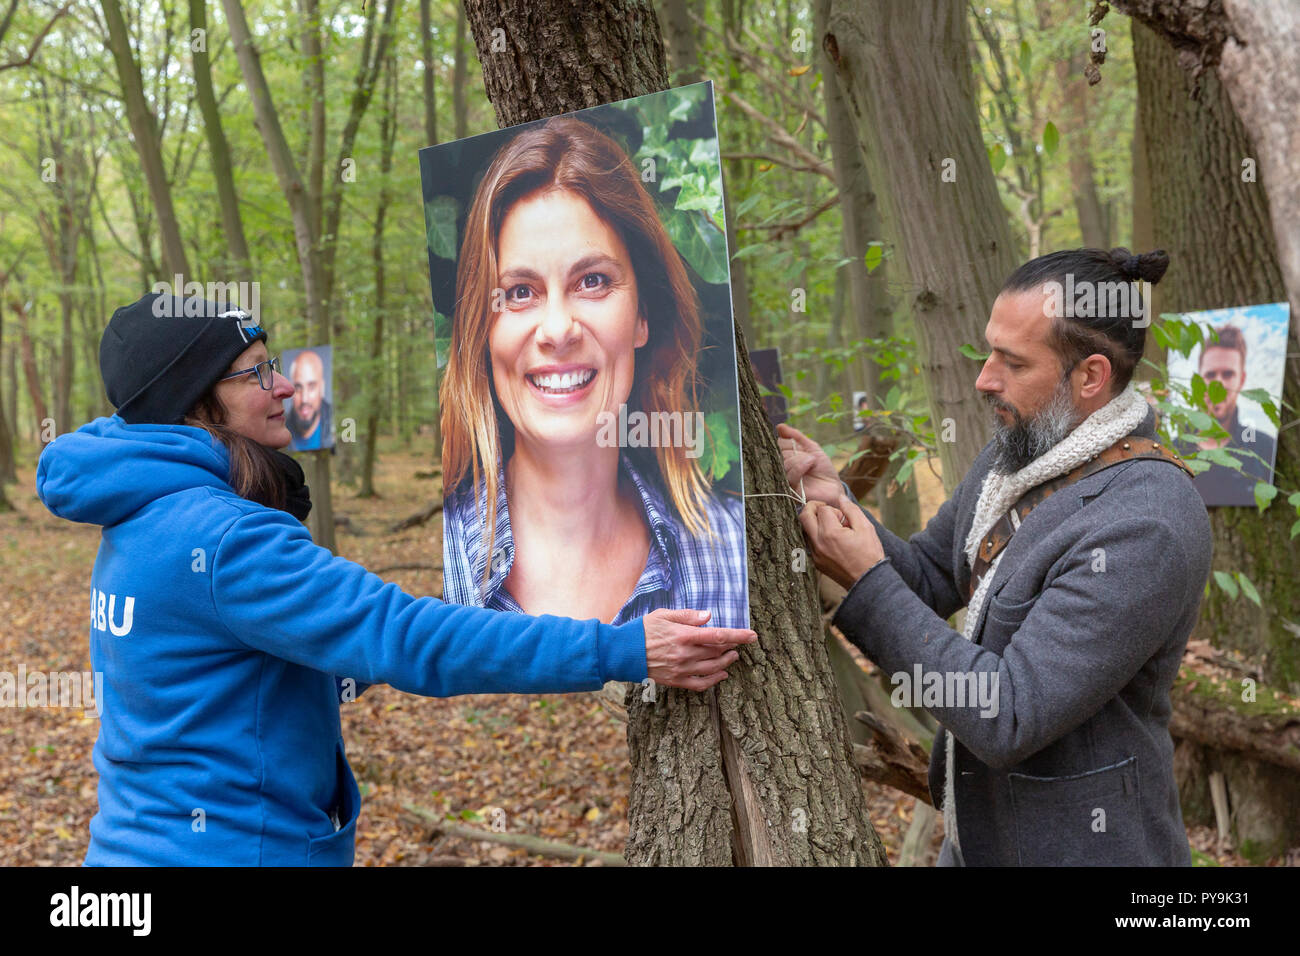 Roy Schroeter and Anette Wolff (Nabu) hang up a photo of Sarah Wiener (TV chef) Stock Photo